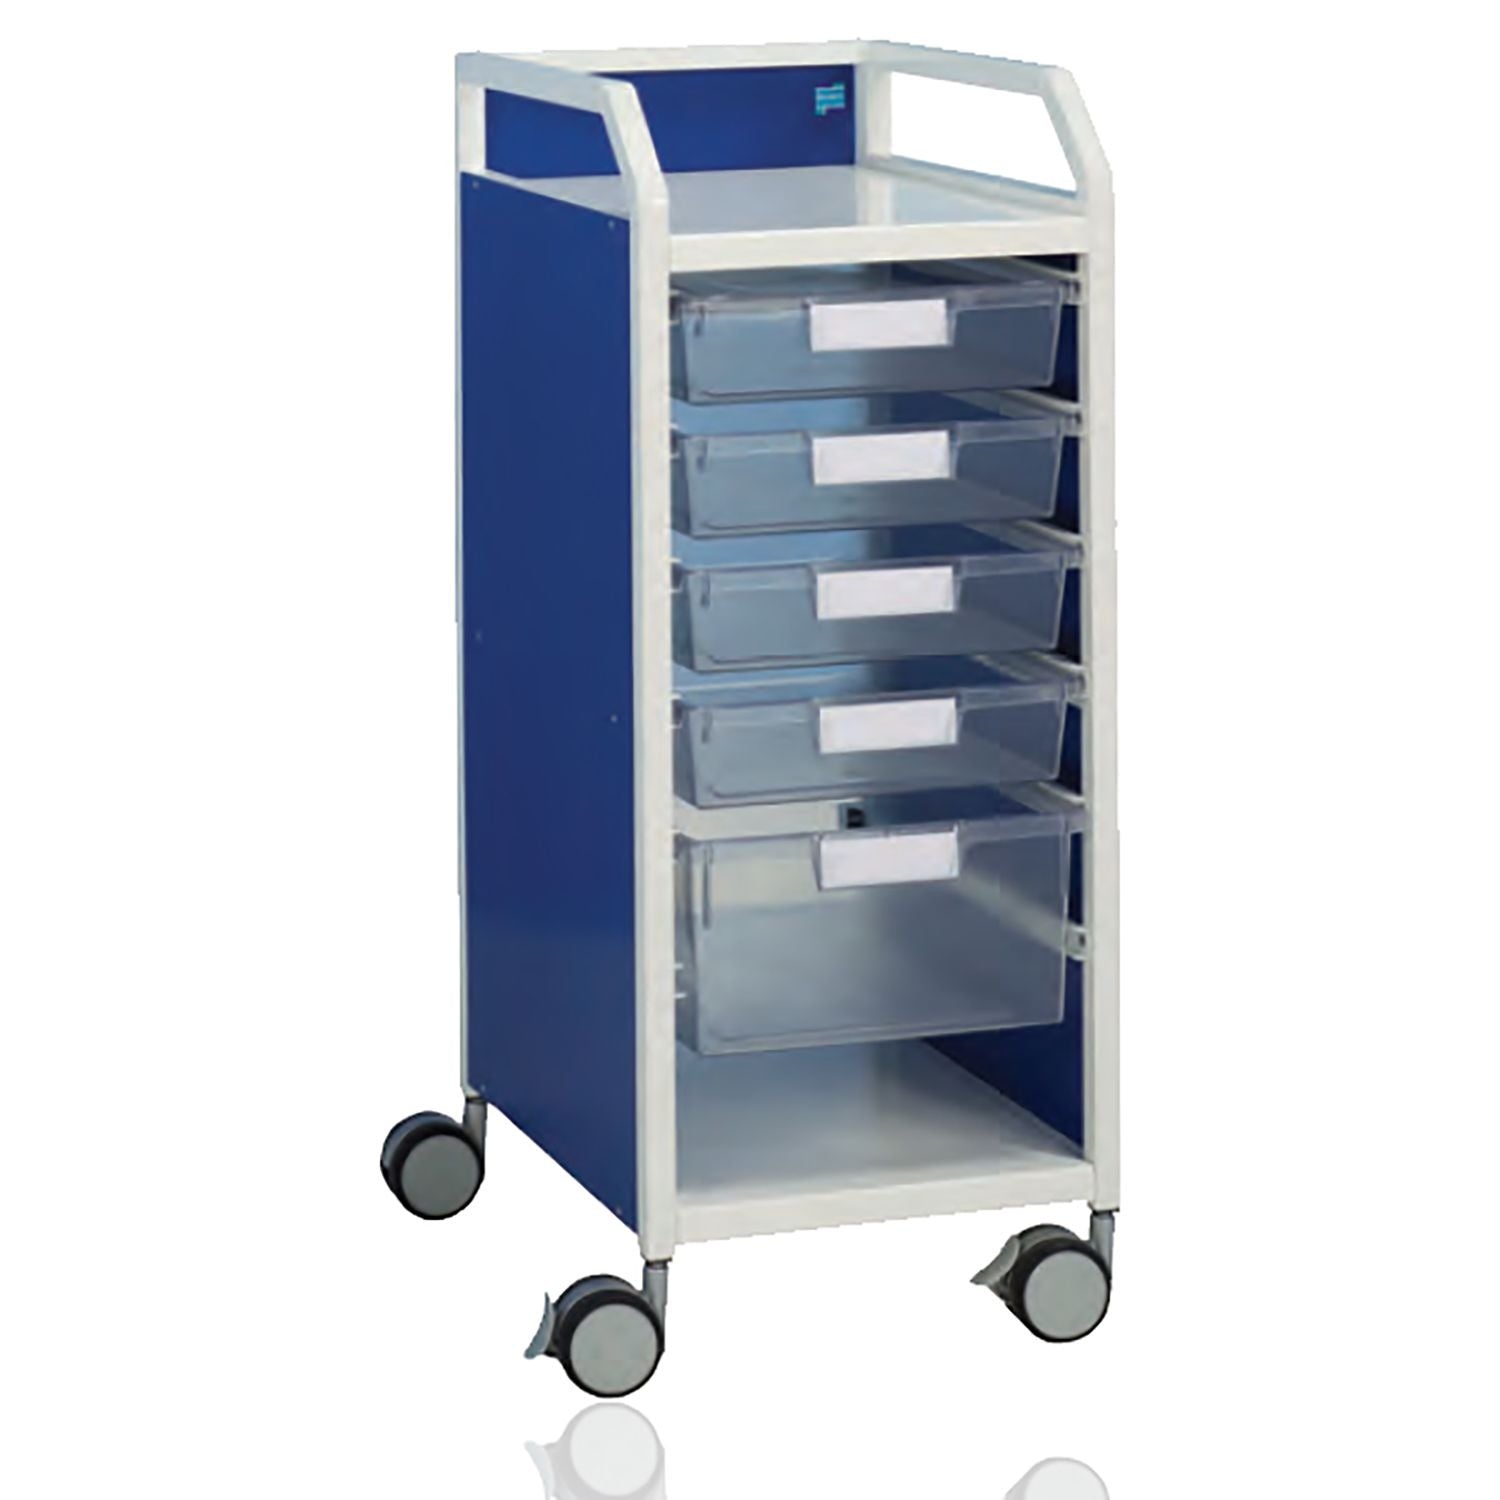 Howarth 2 Trolley with White Panels 960 x 265 x 445mm (HxWxD)